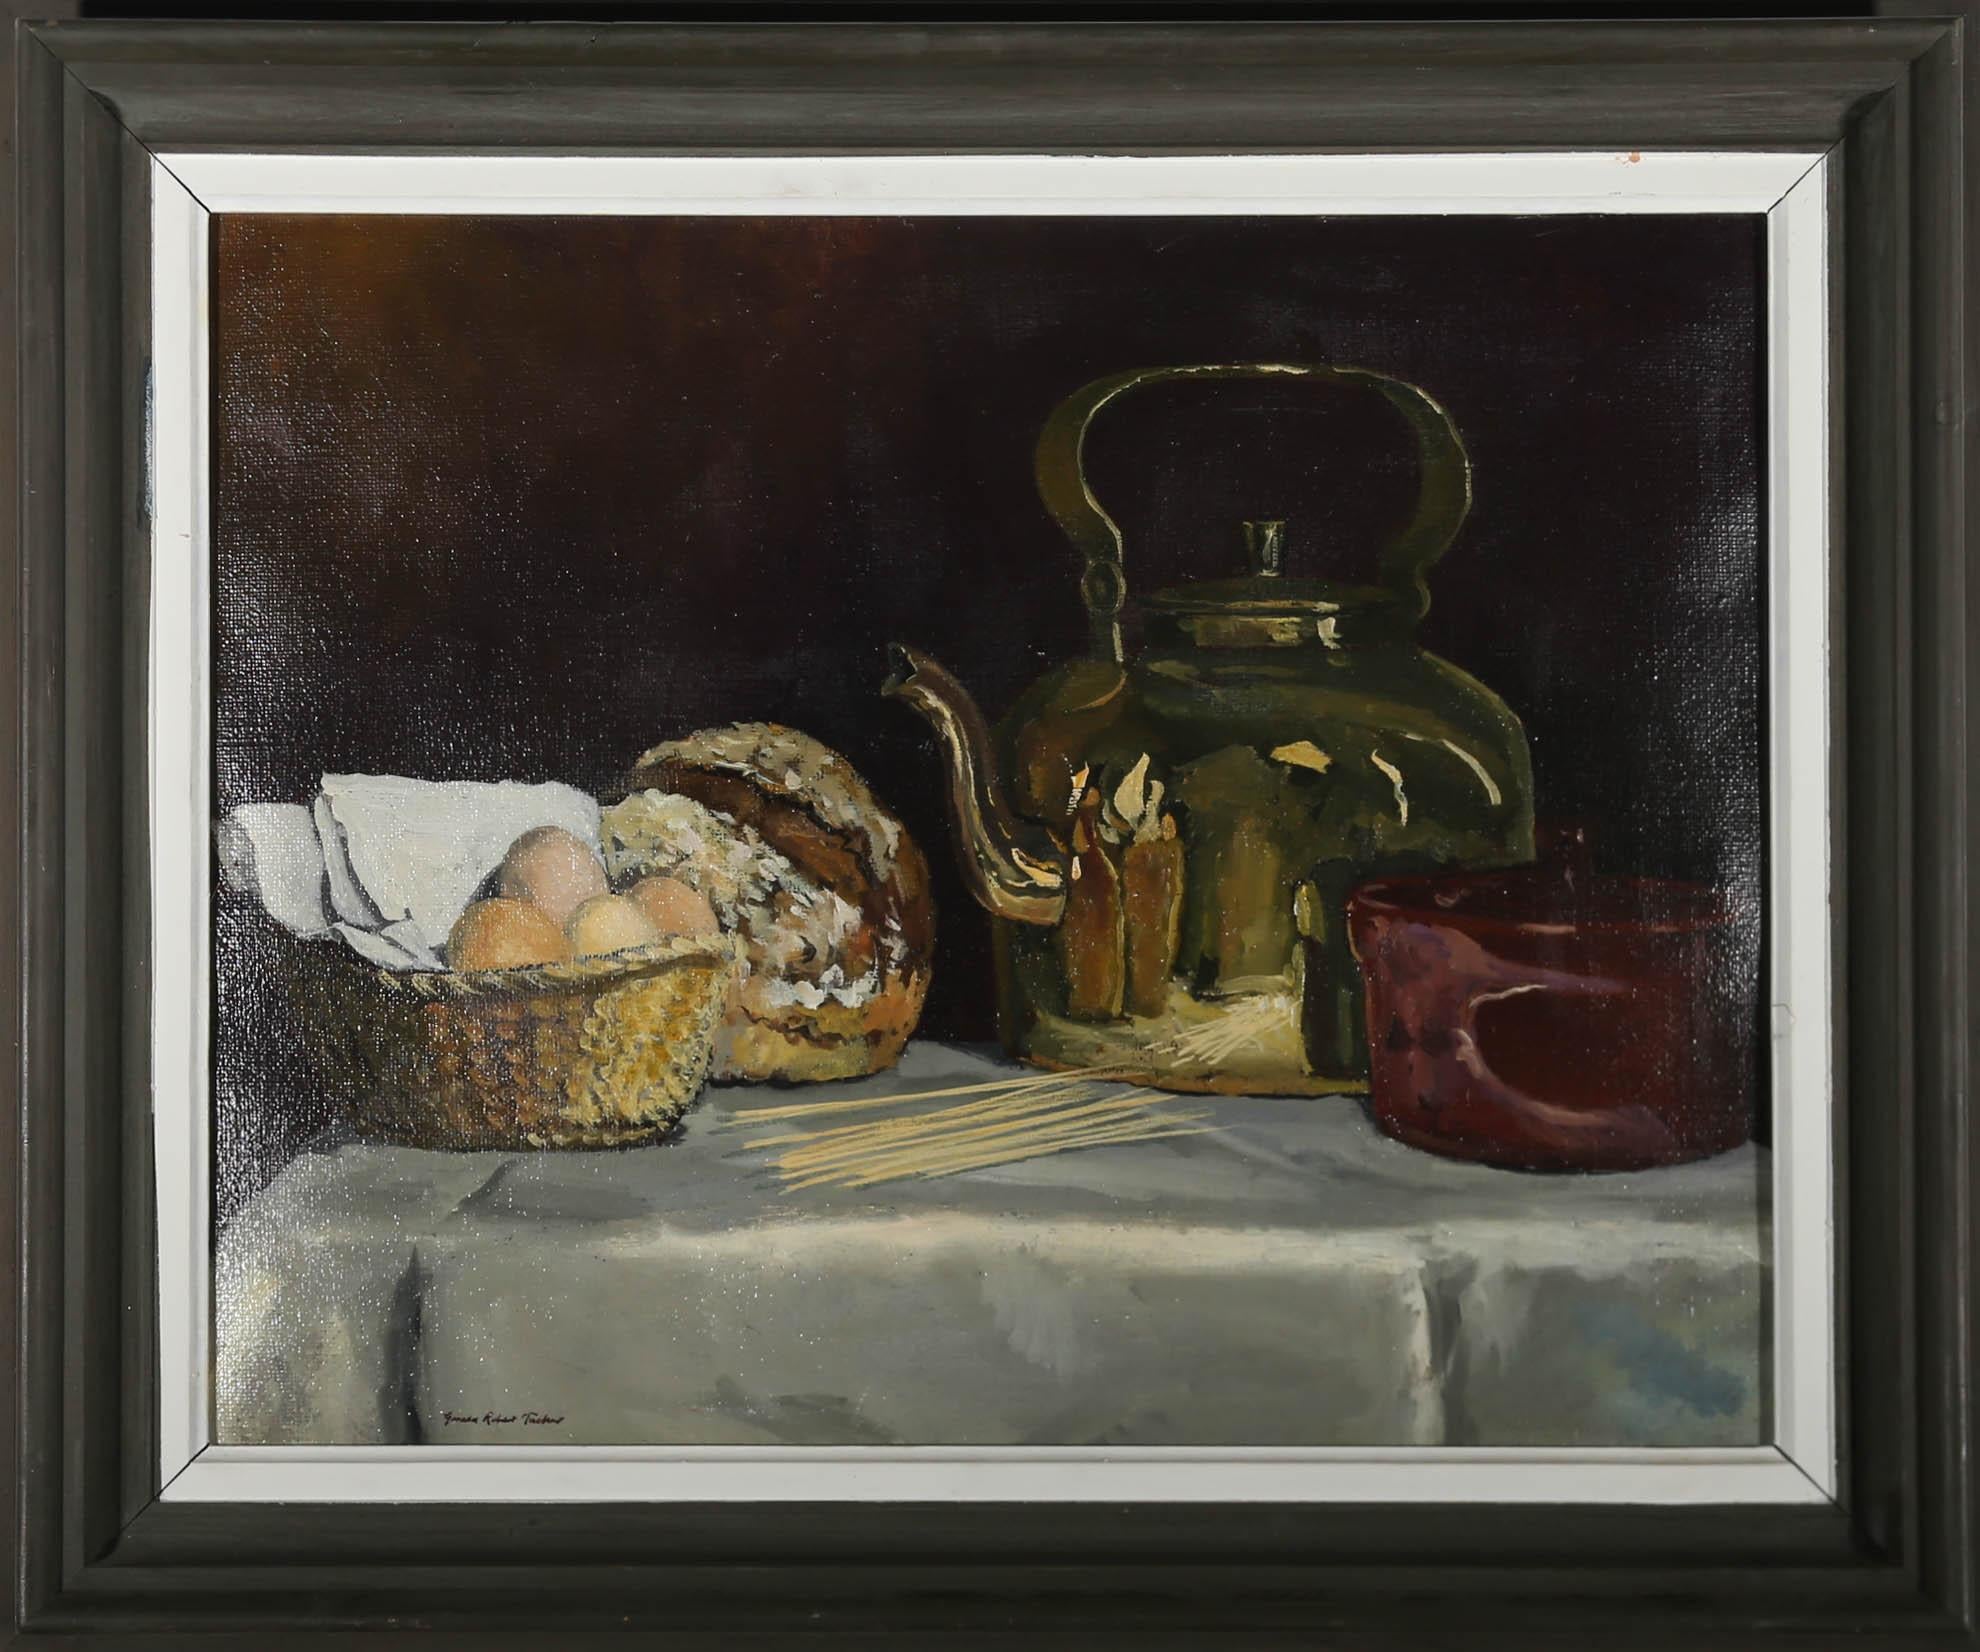 A delightful Mid-Century piece depicting a copper kettle and fresh bread placed in a darkened interior. The artist has a strong focus on light within the scene, with reflections in the metallic surfaces standing out against the black background.